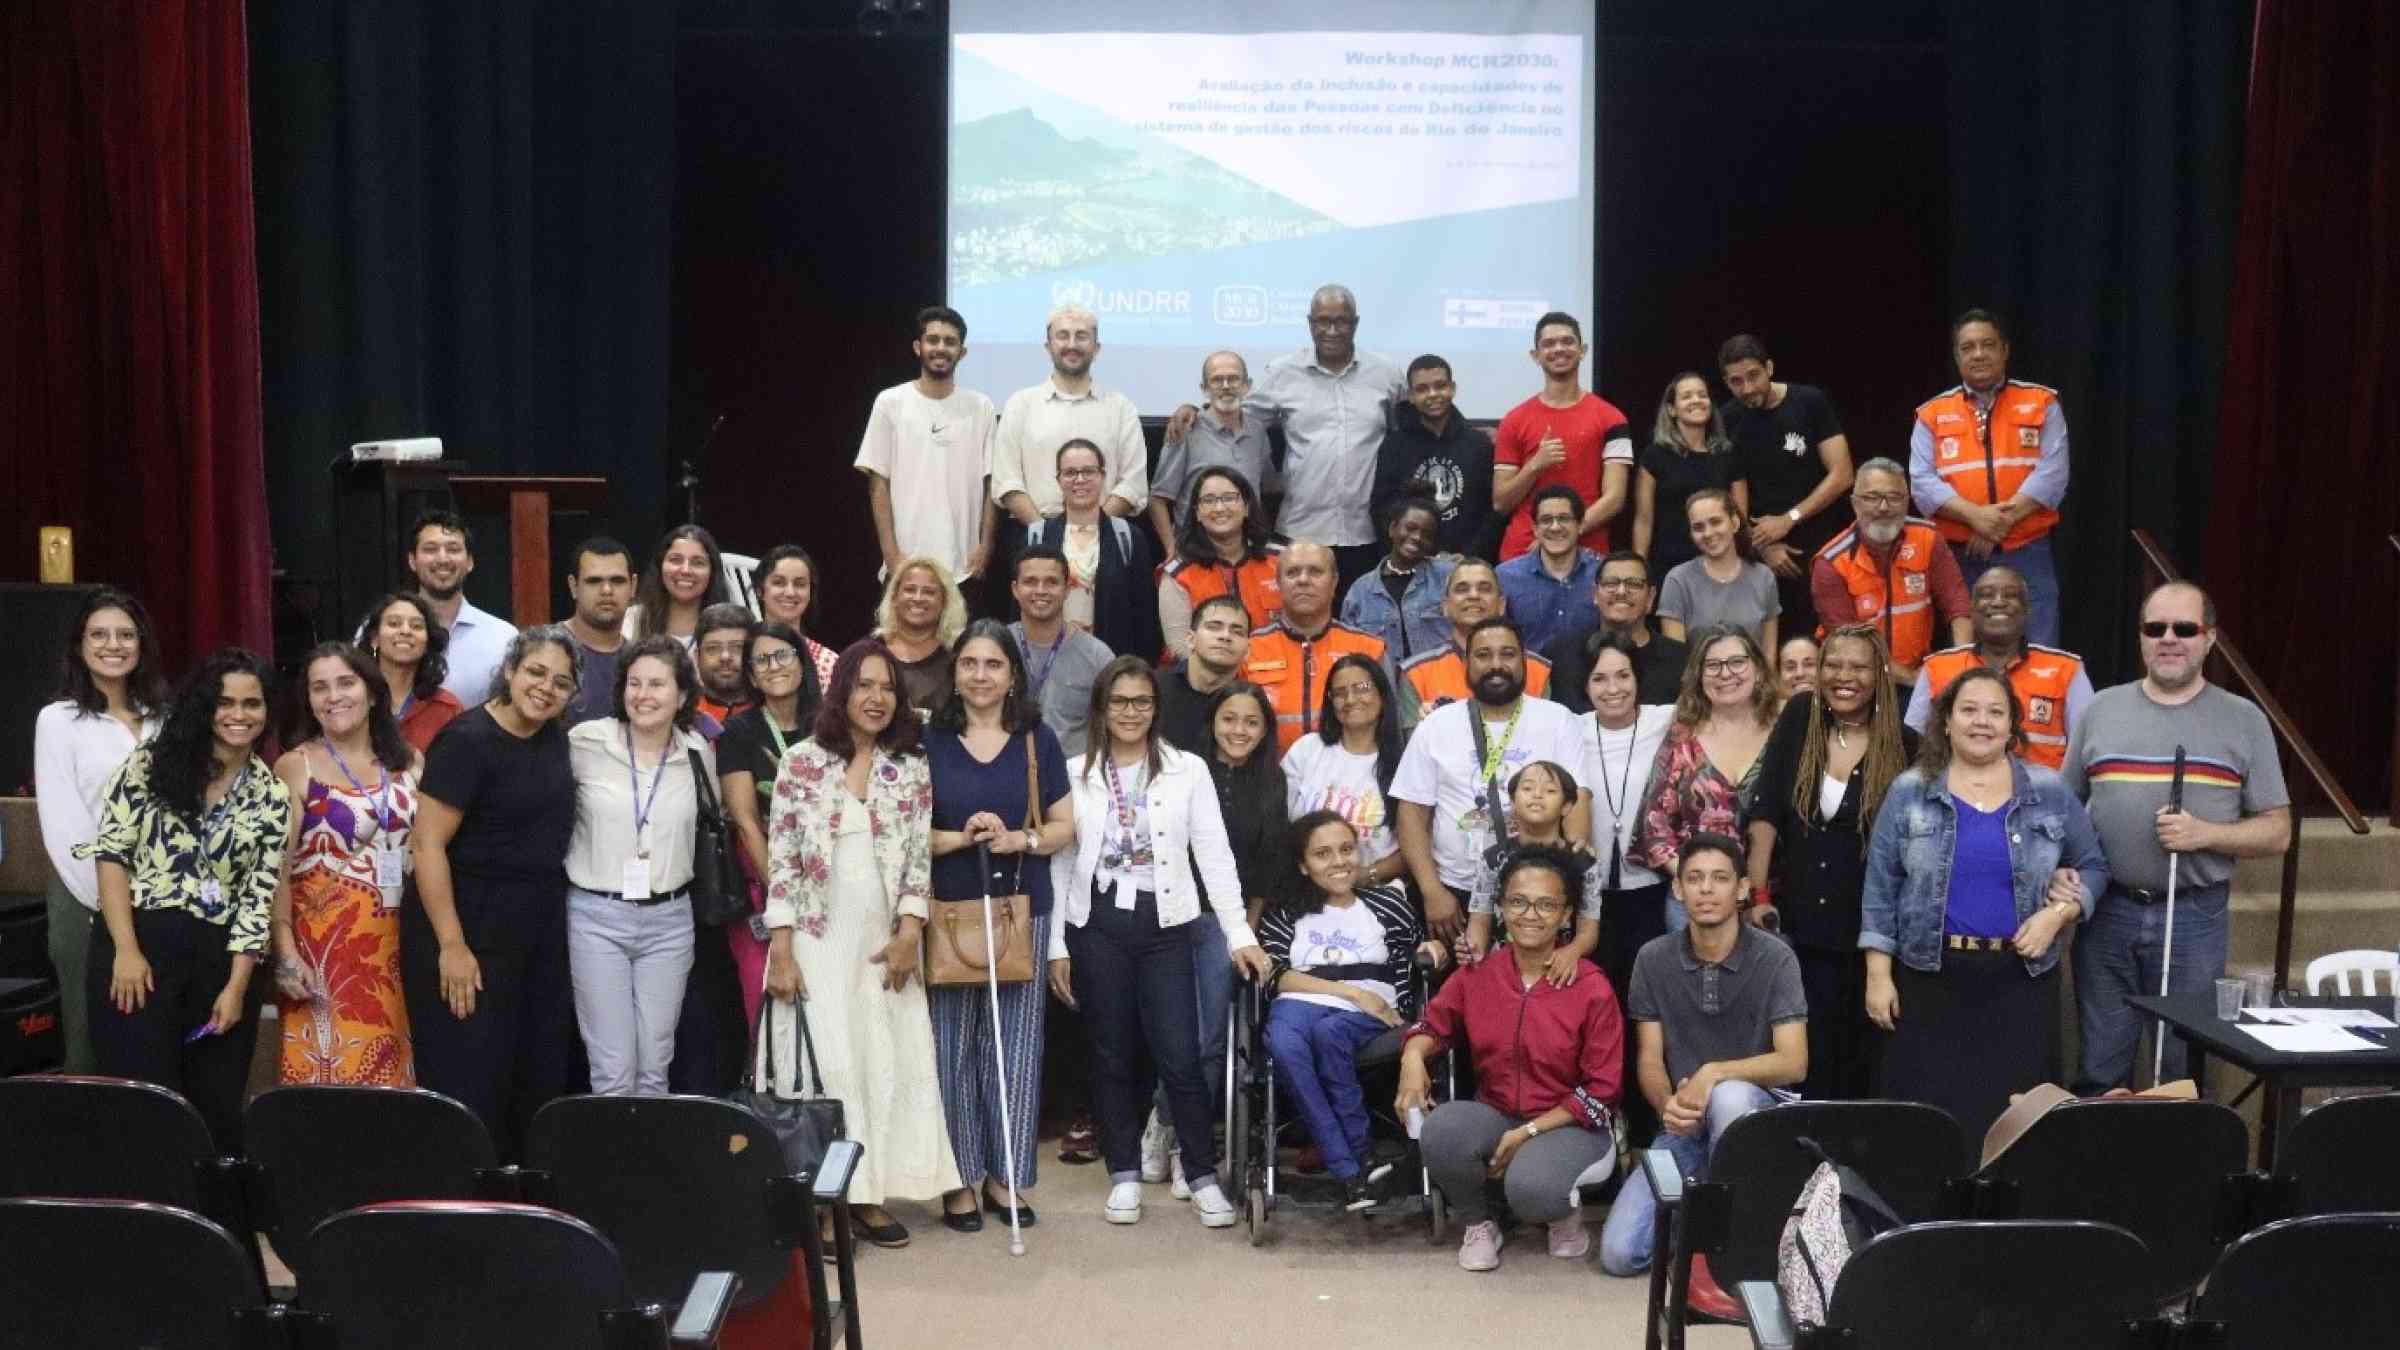 Rio de Janeiro strengthens the Inclusion of Persons with Disabilities in Disaster Risk Reduction during UNDRR-MCR2030 workshop